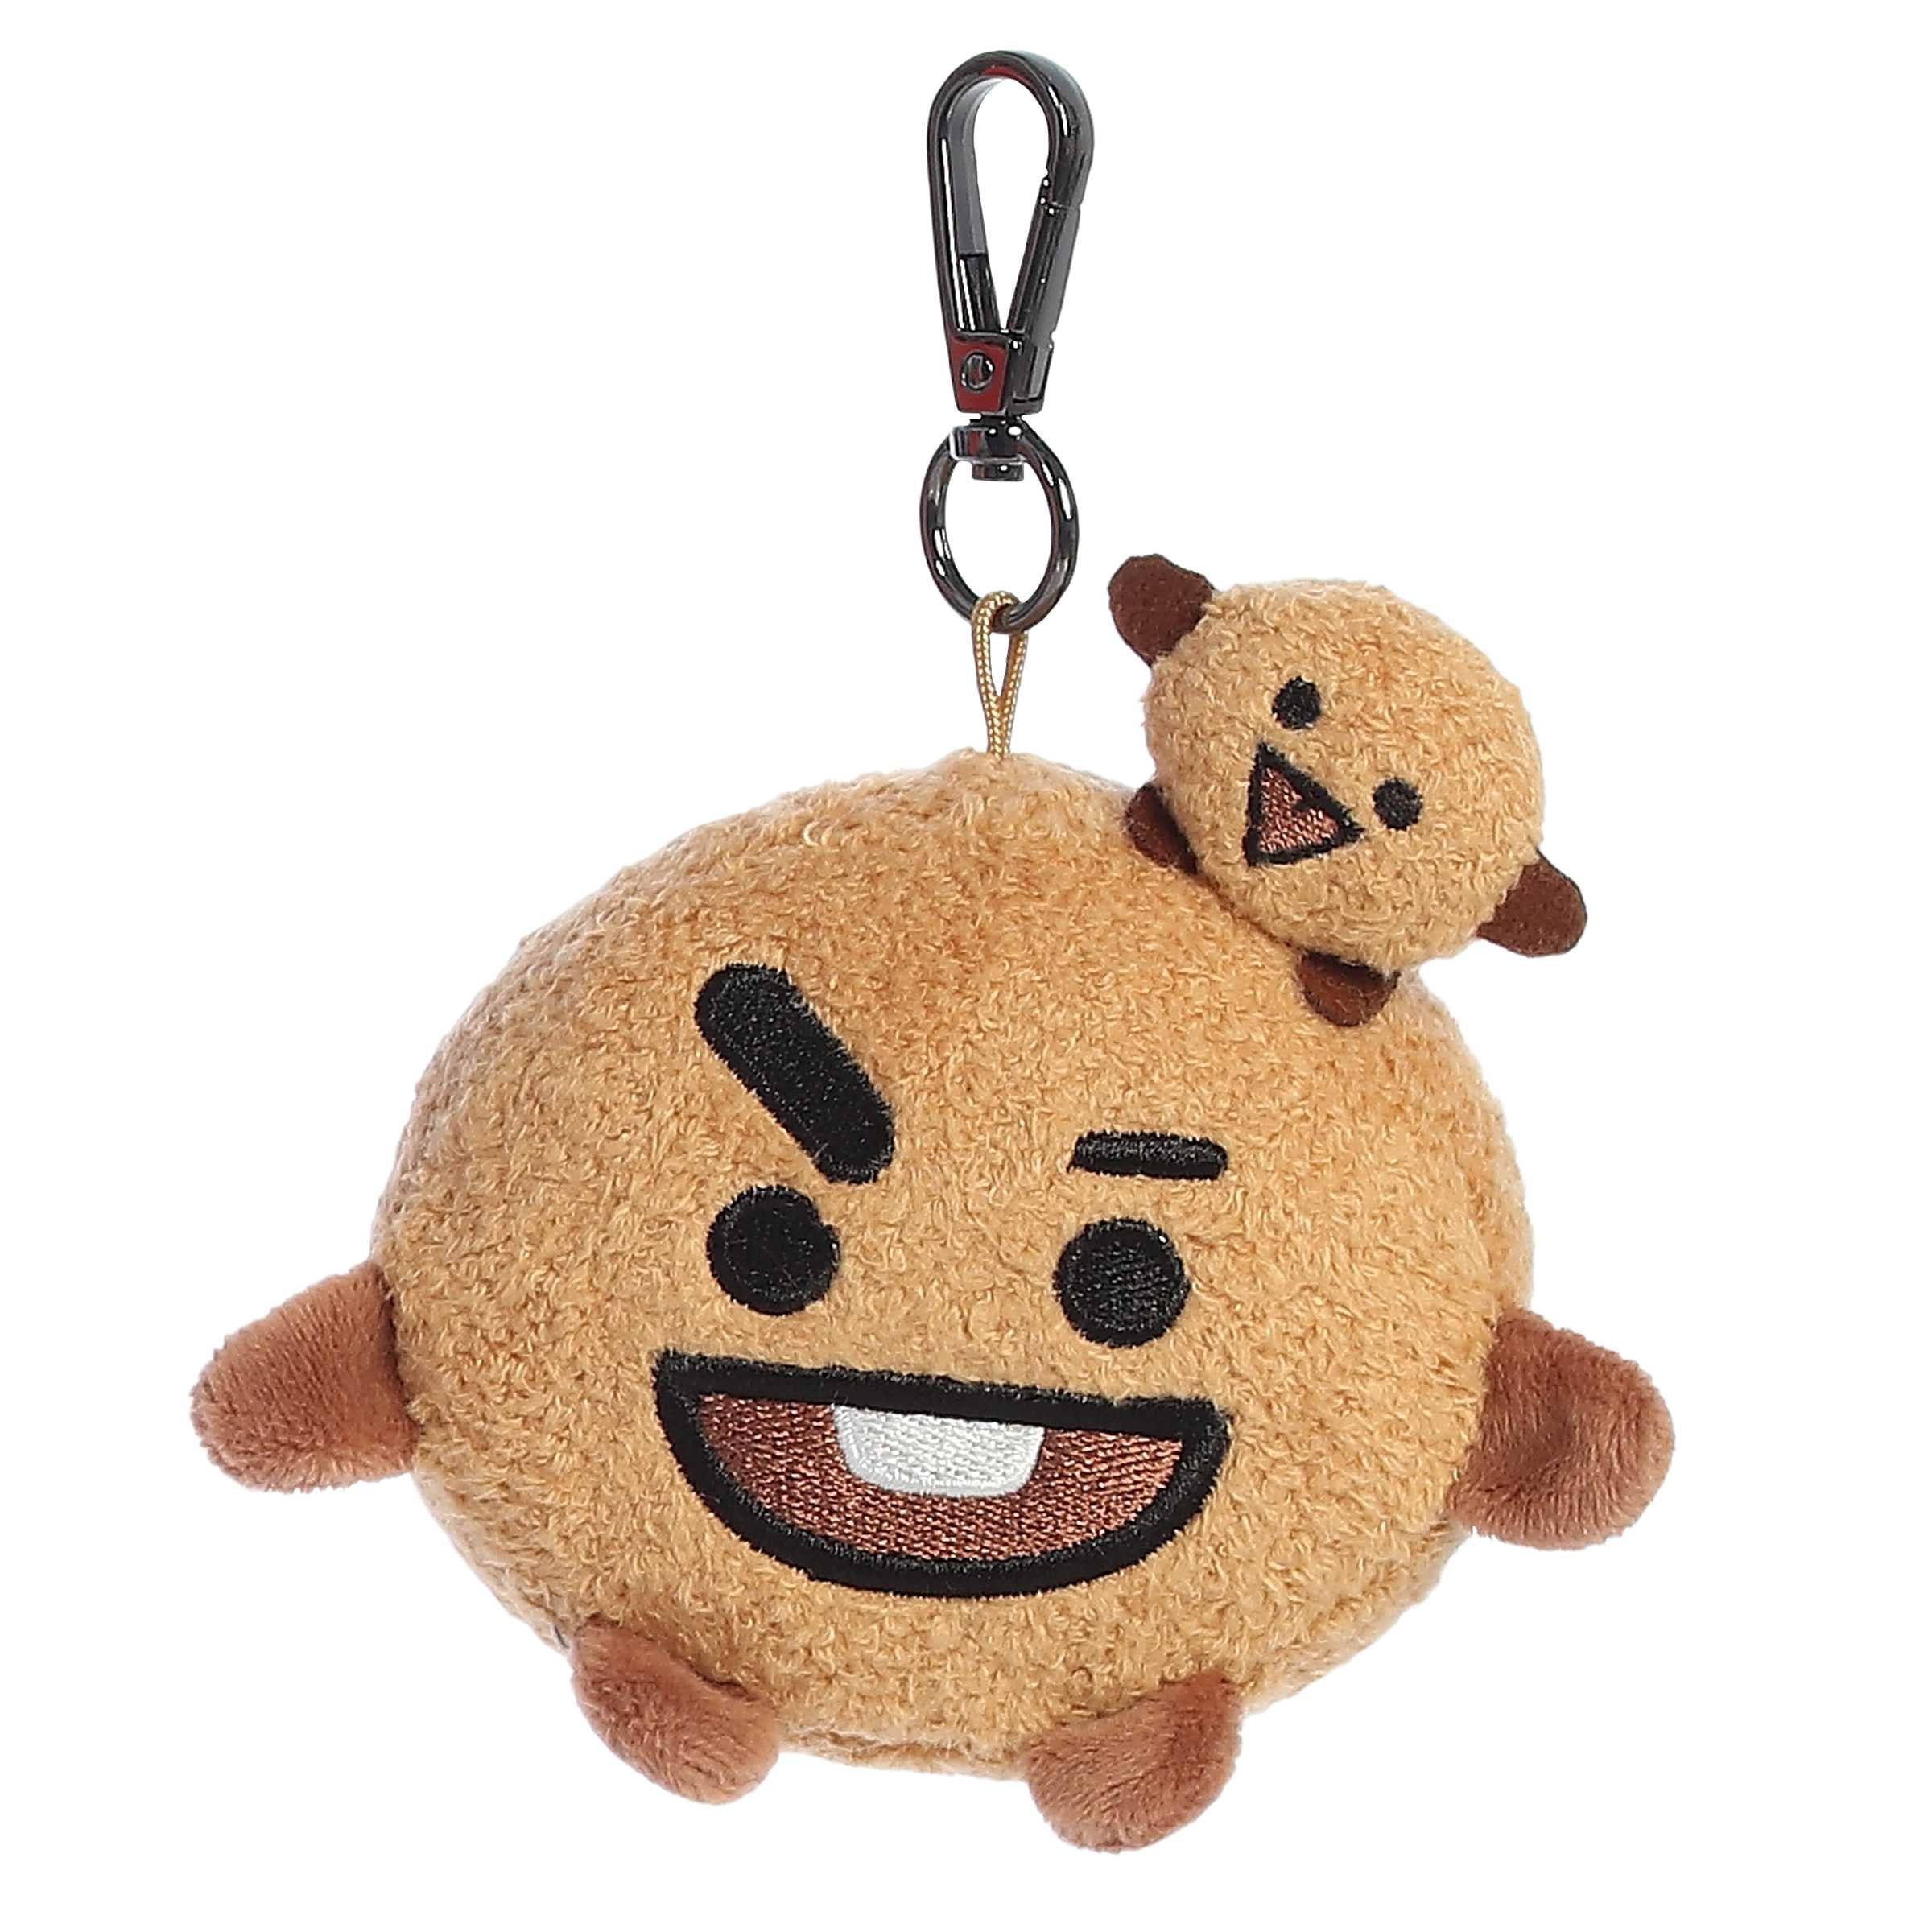  AURORA, 61462, BT21 Official Merchandise, SHOOKY Soft Toy,  Small, Brown : Toys & Games